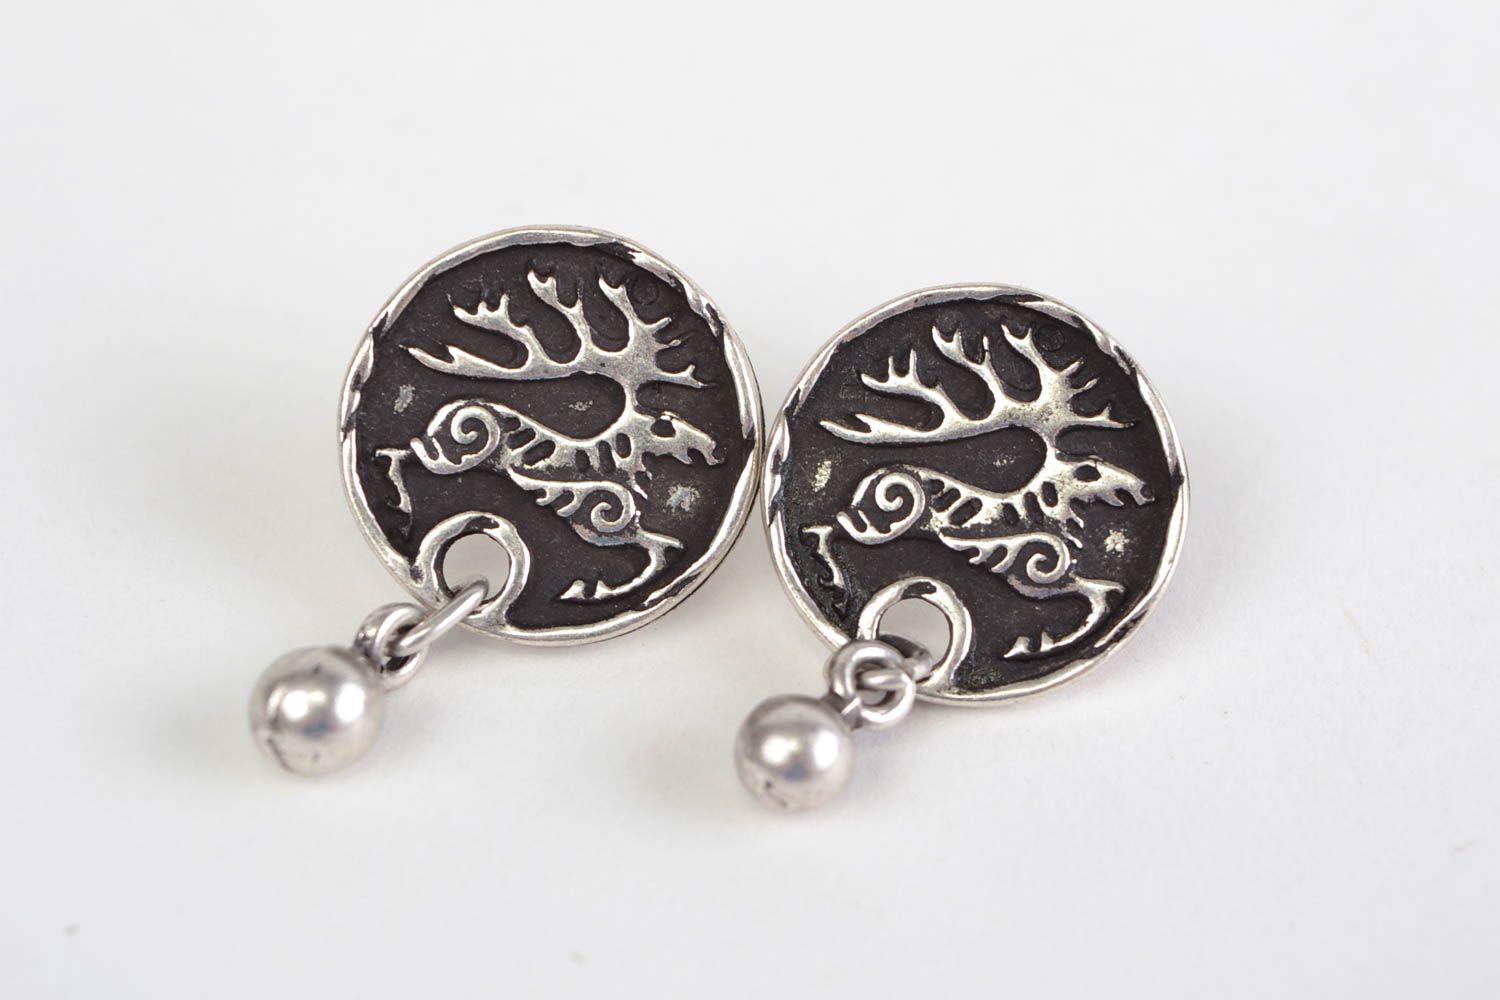 Handmade small round stud earrings cast of hypoallergenic metal with deer image photo 2